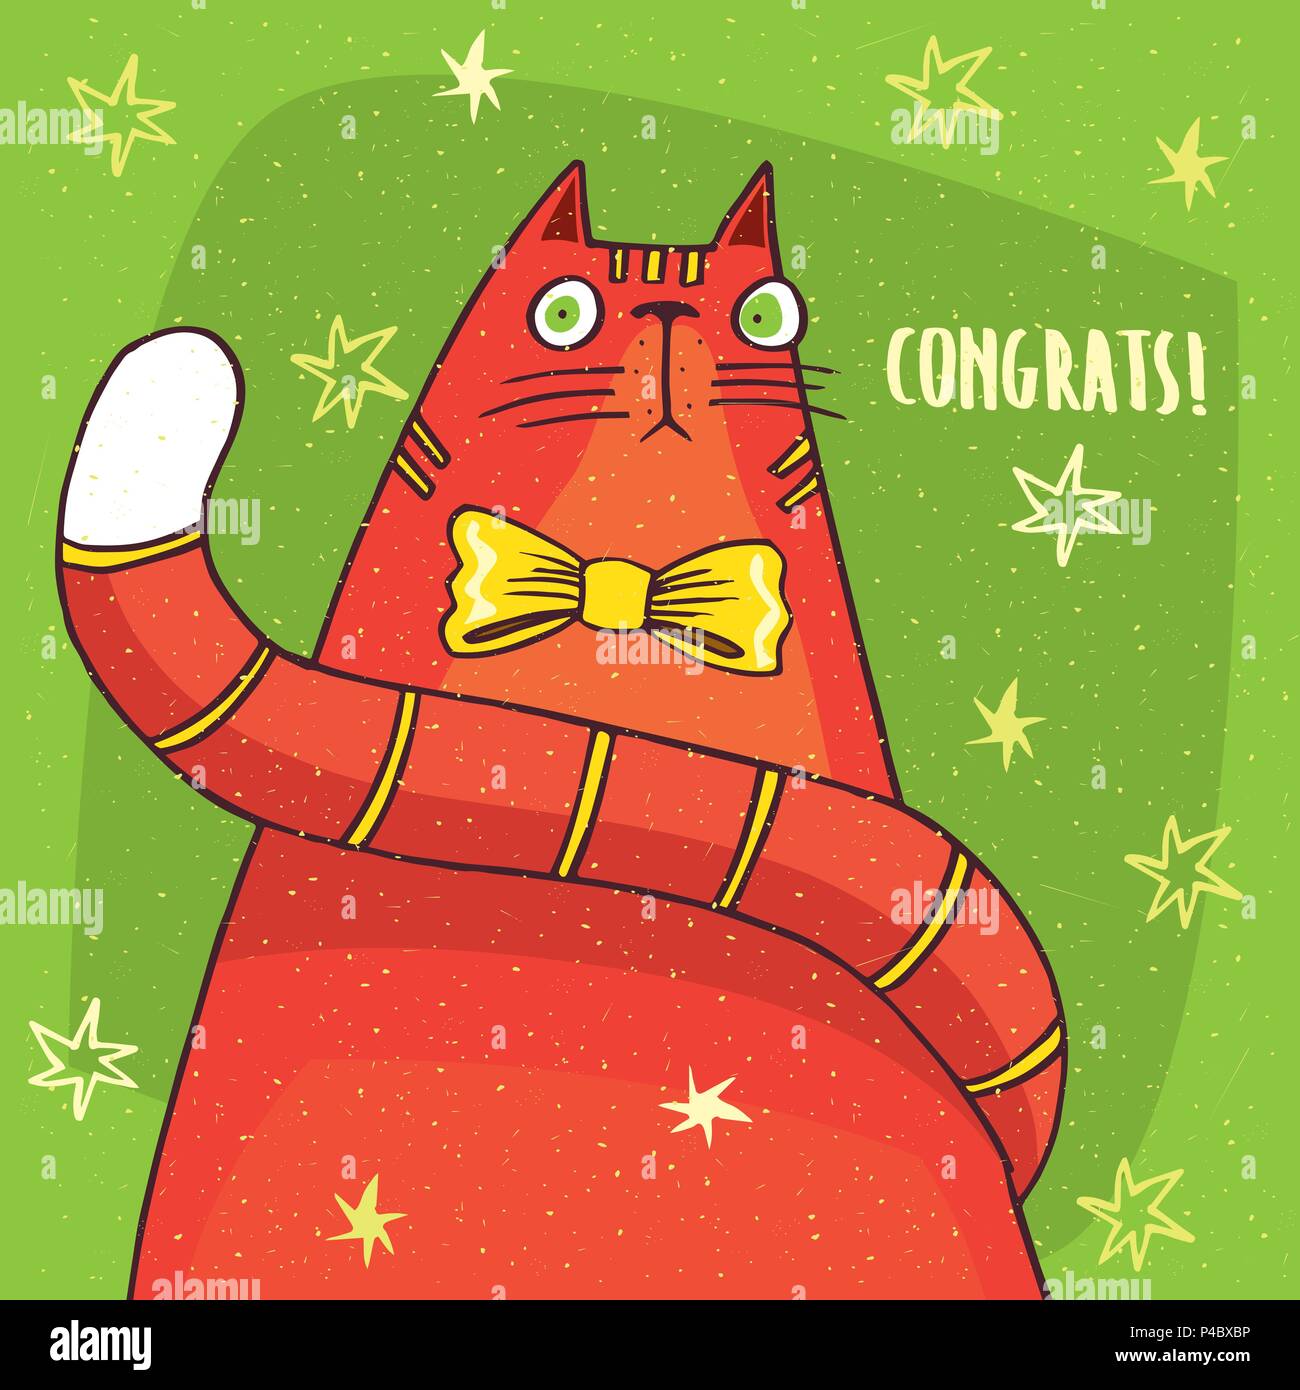 Funny red cat with big tail and an yellow bow on its neck sits in full face and looks ahead in surprise. Inscription with a congratulation. Hand drawn Stock Vector